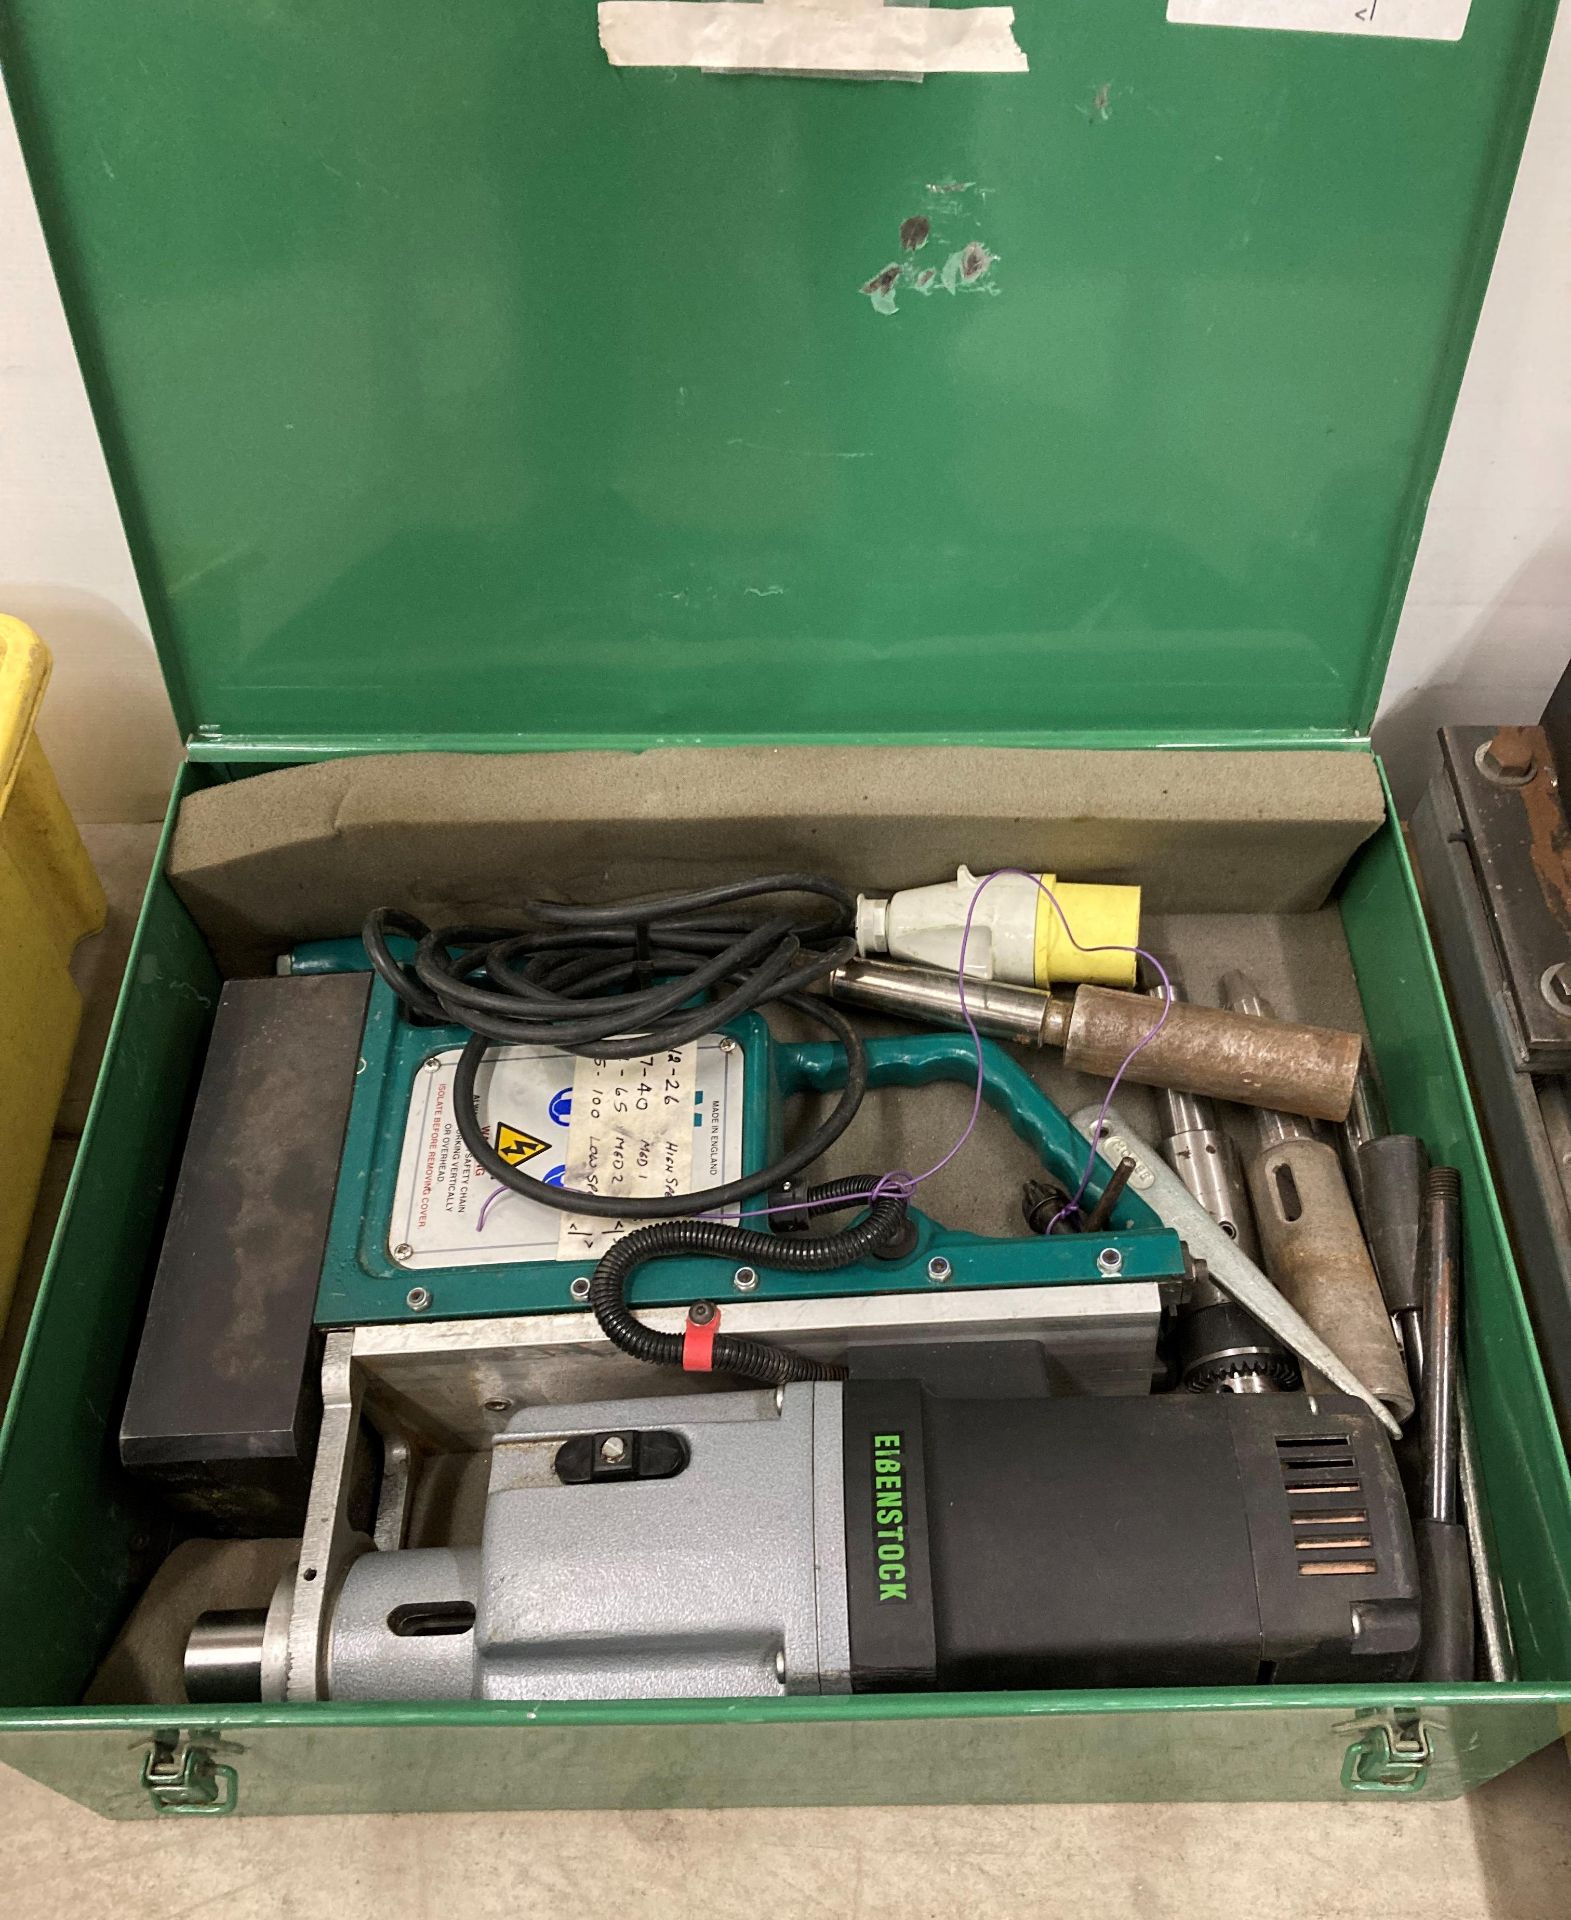 EIBENSTOCK EHB 110V MAG DRILL WITH METAL PACE UNIT AND ACCESSORIES (saleroom location: H08) - Image 2 of 4